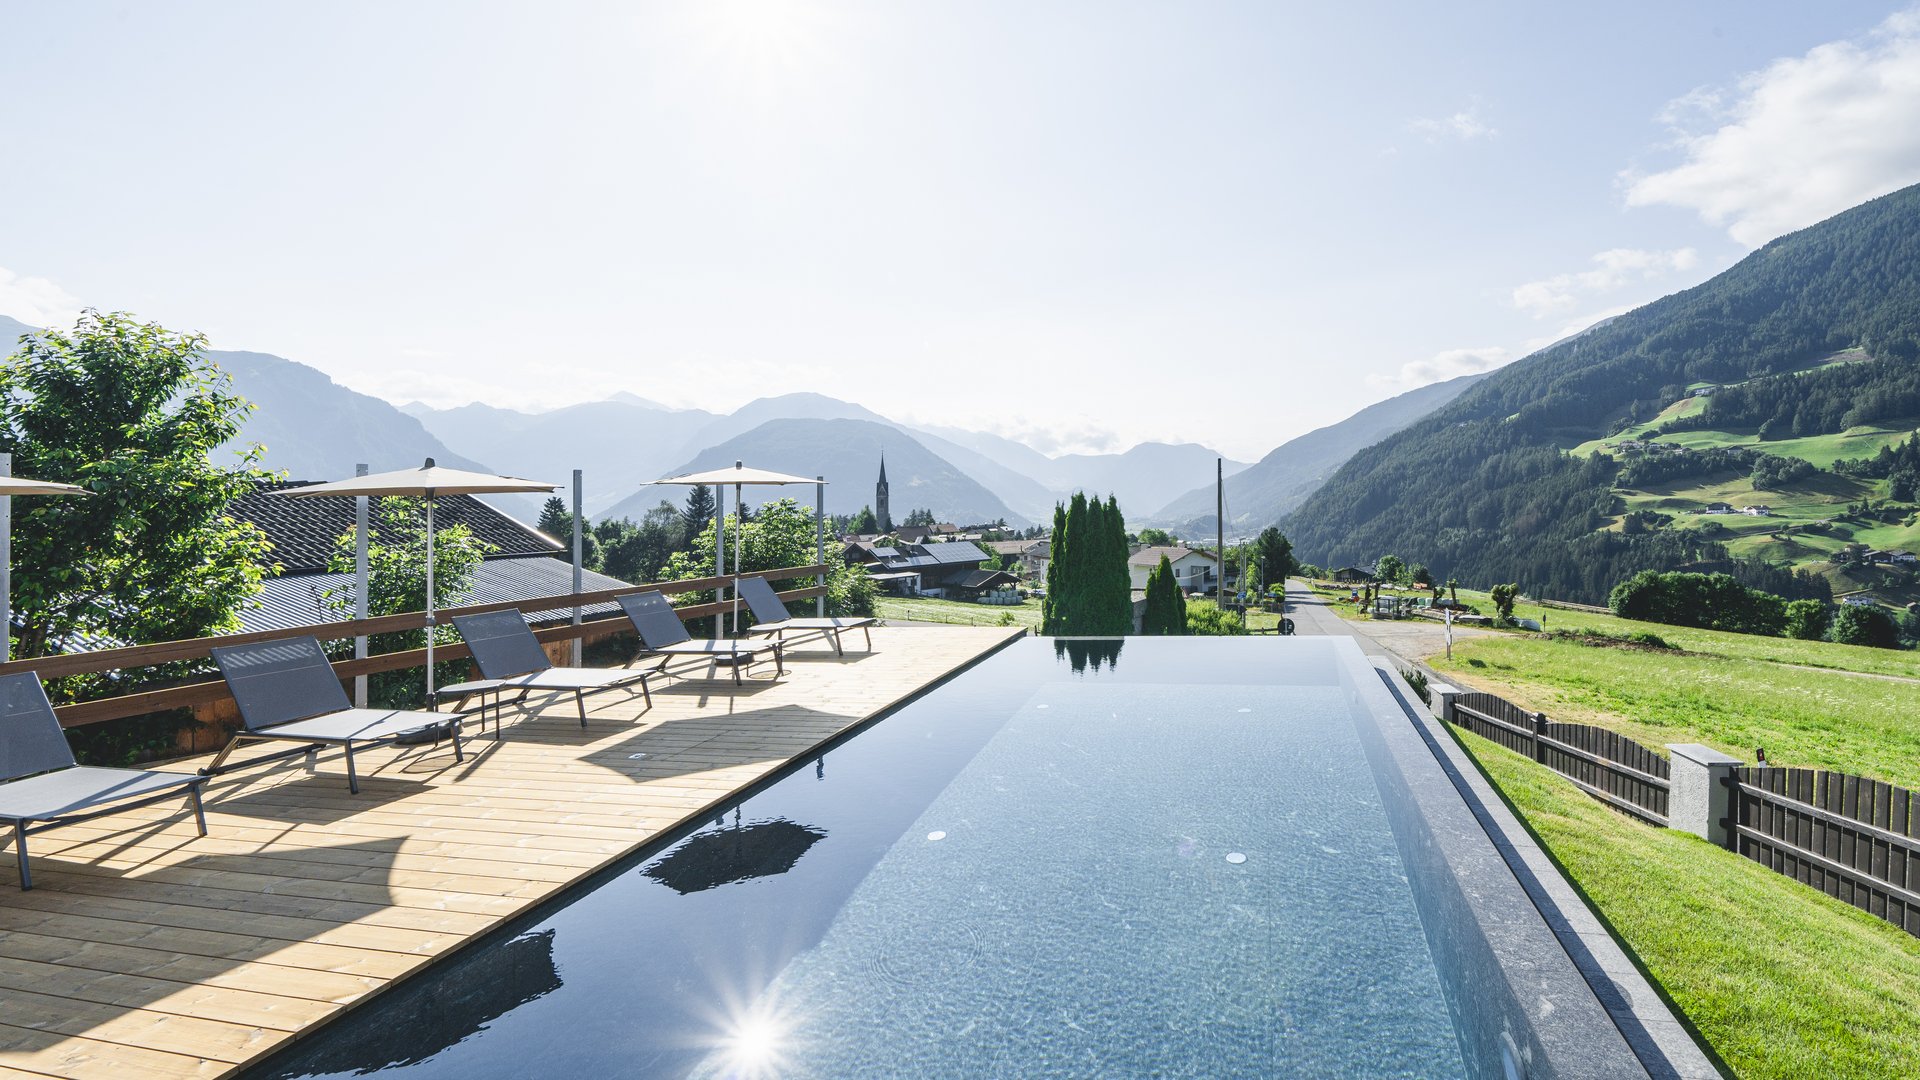 Our hiking and wellness hotel near Sterzing: Lahnerhof